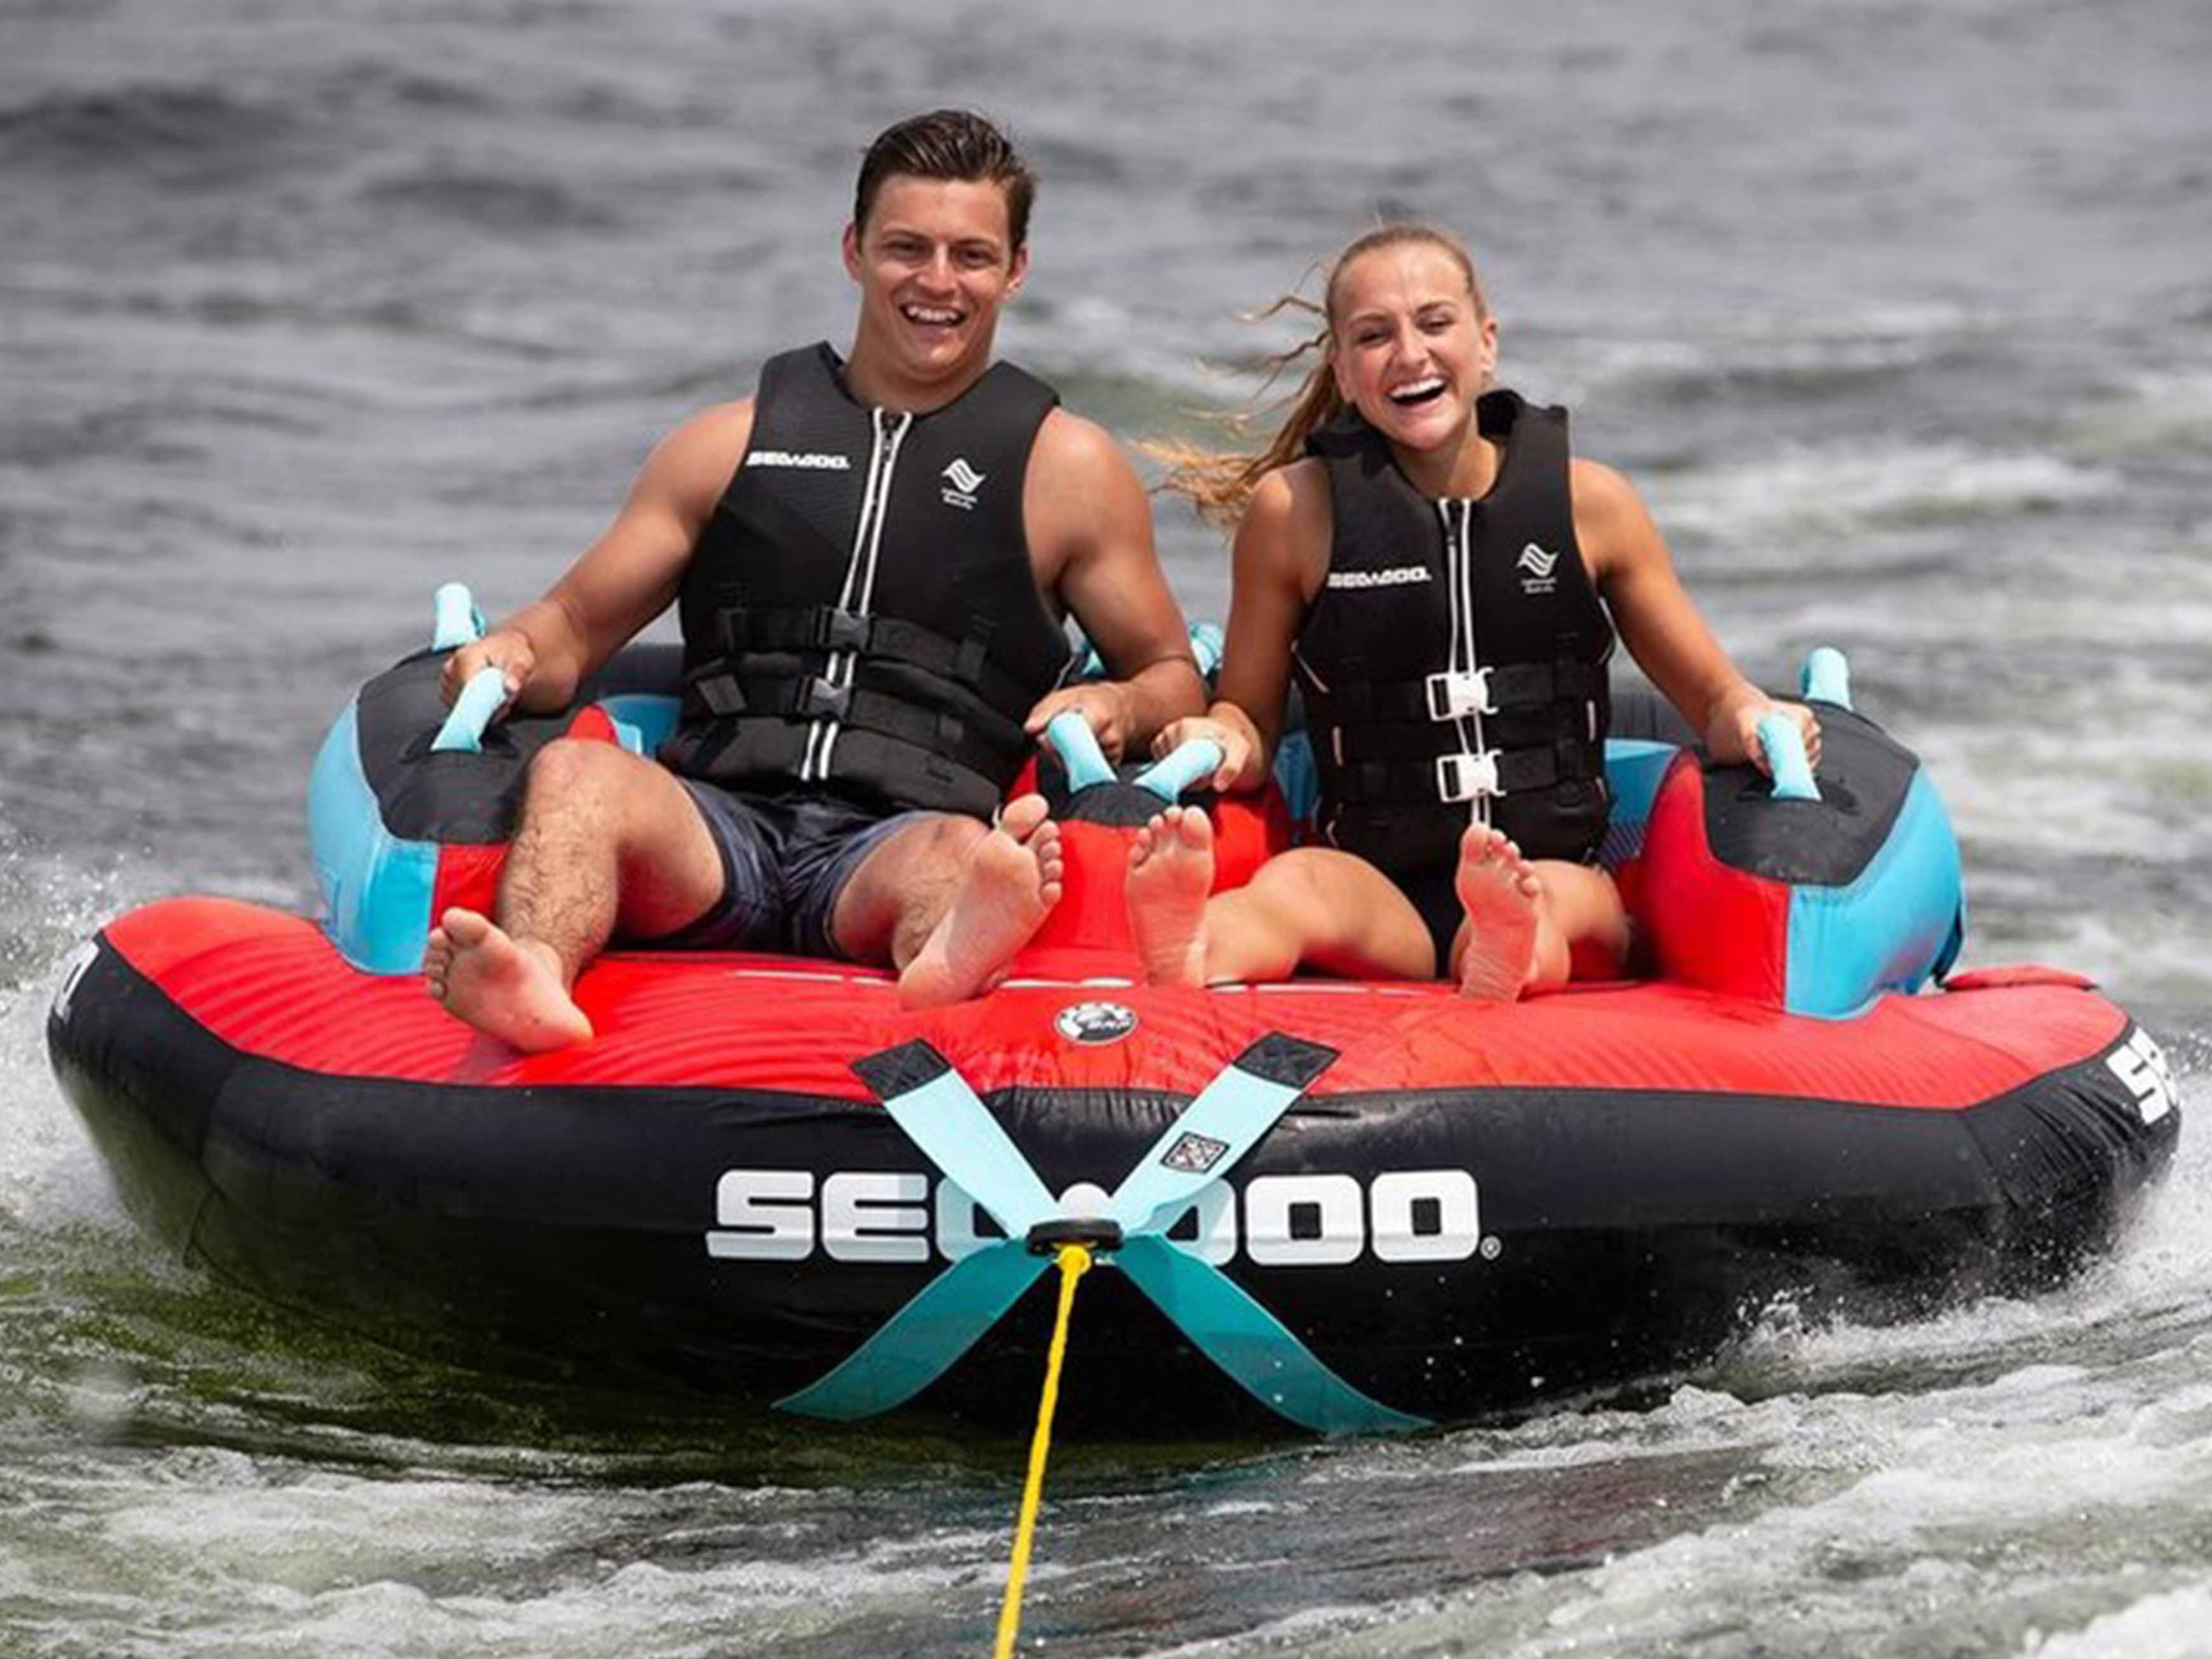 TOP 5 CHRISTMAS GIFTS FOR ANY JETSKI LOVER